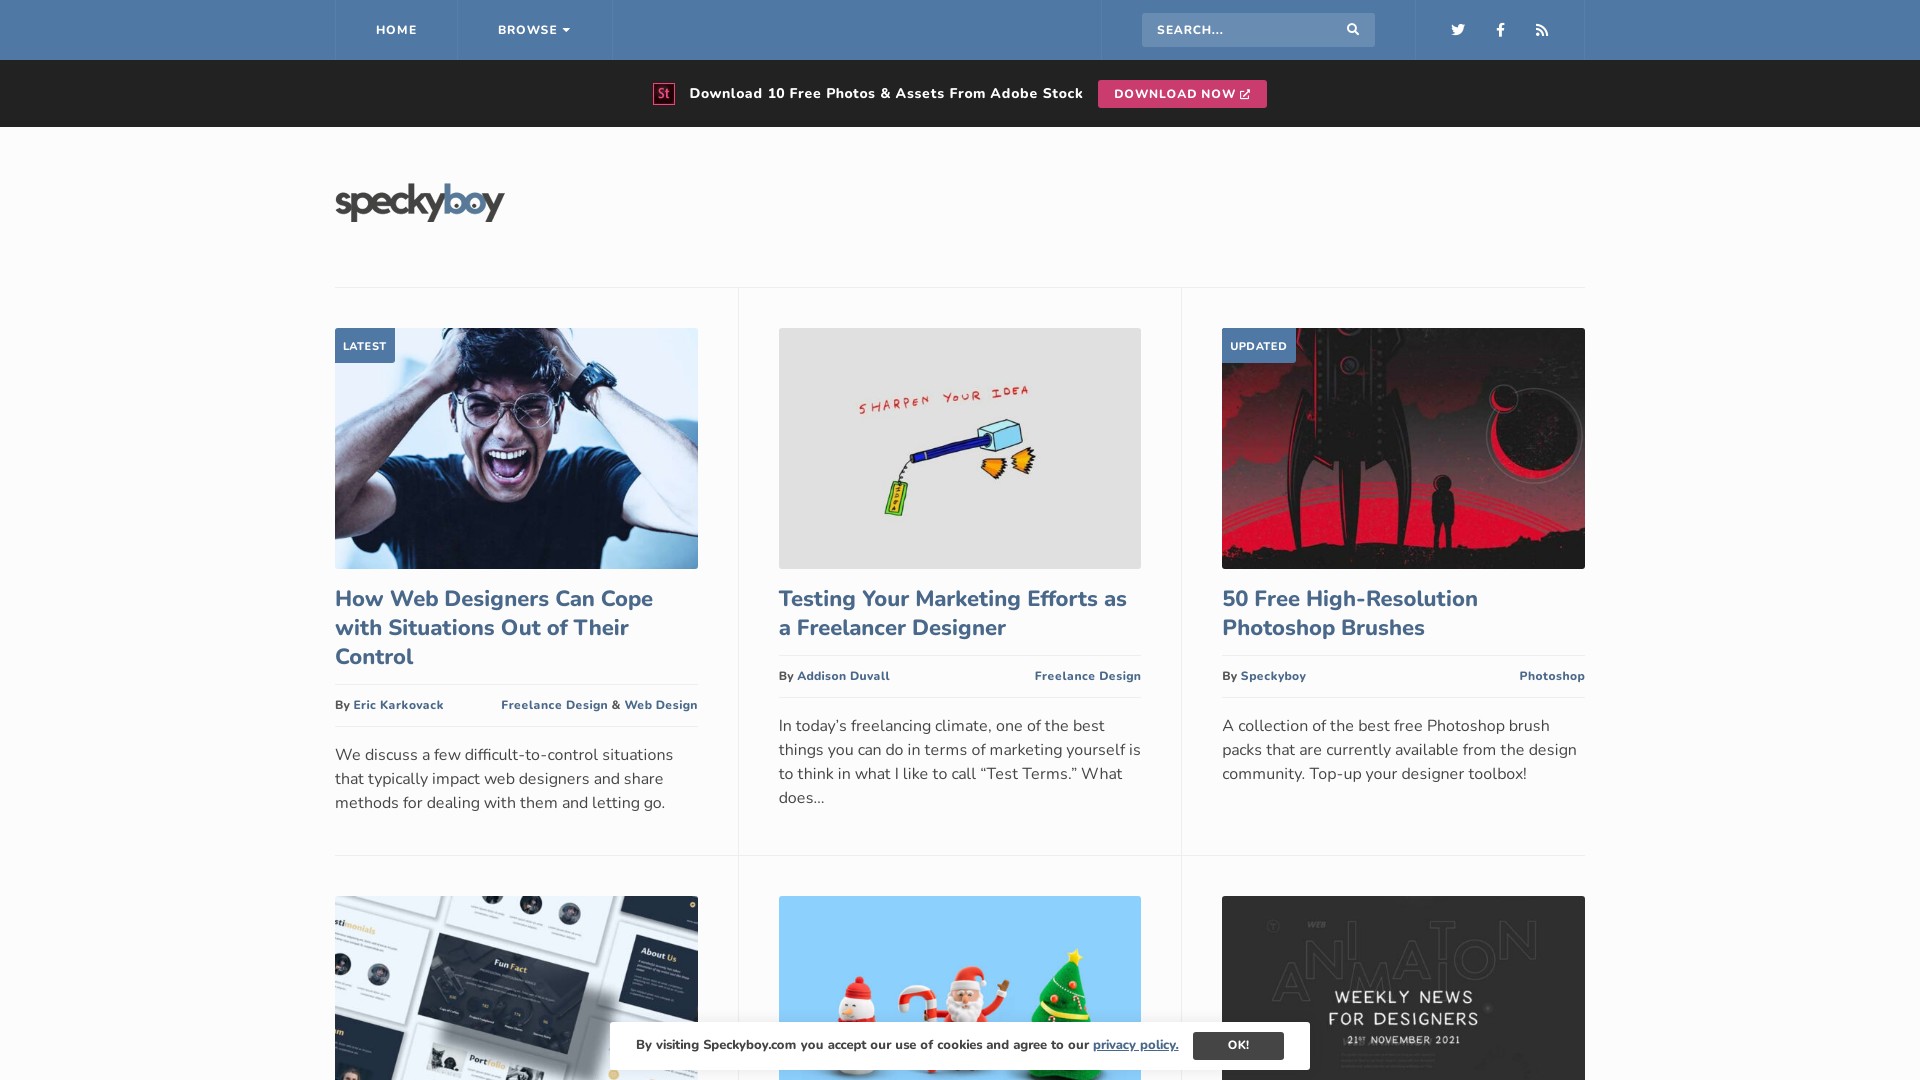 Speckyboy is an online magazine for designers and developers. We share helpful resources and tips, explore new techniques, and hopefully inspire.